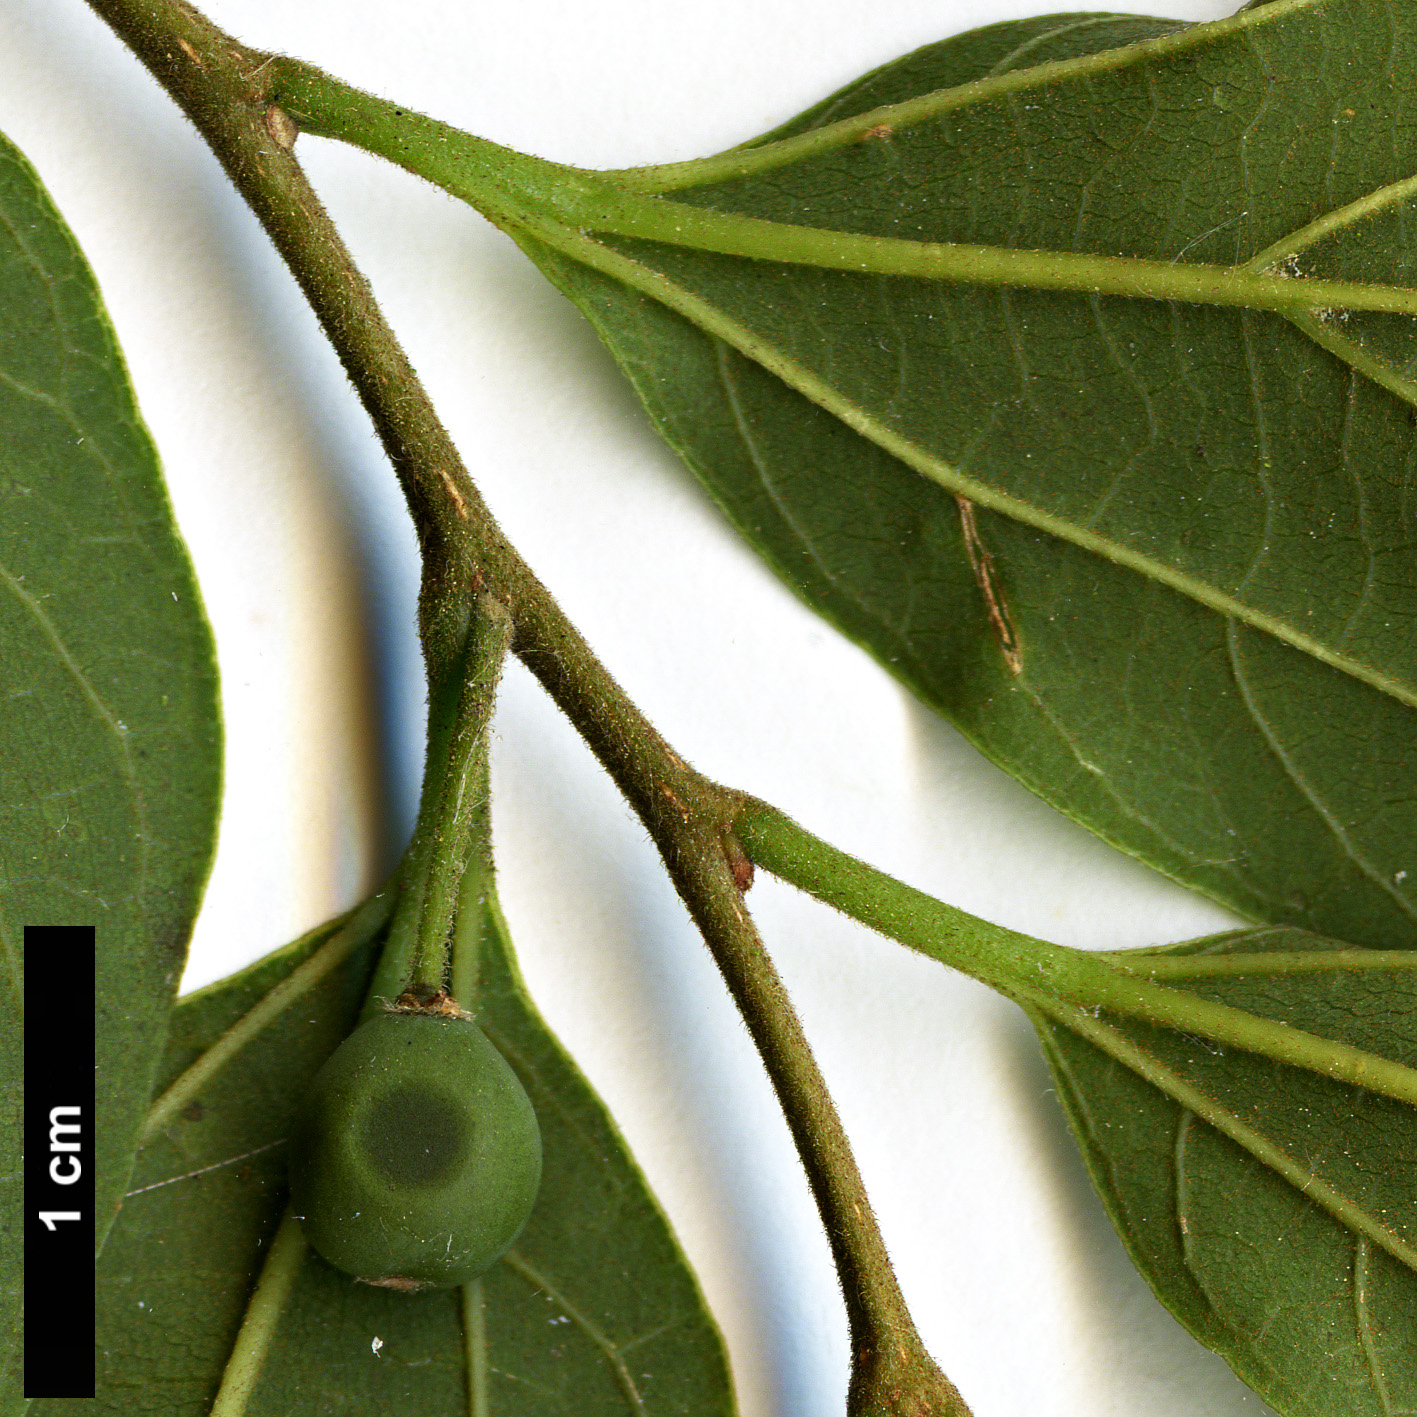 High resolution image: Family: Cannabaceae - Genus: Celtis - Taxon: sinensis